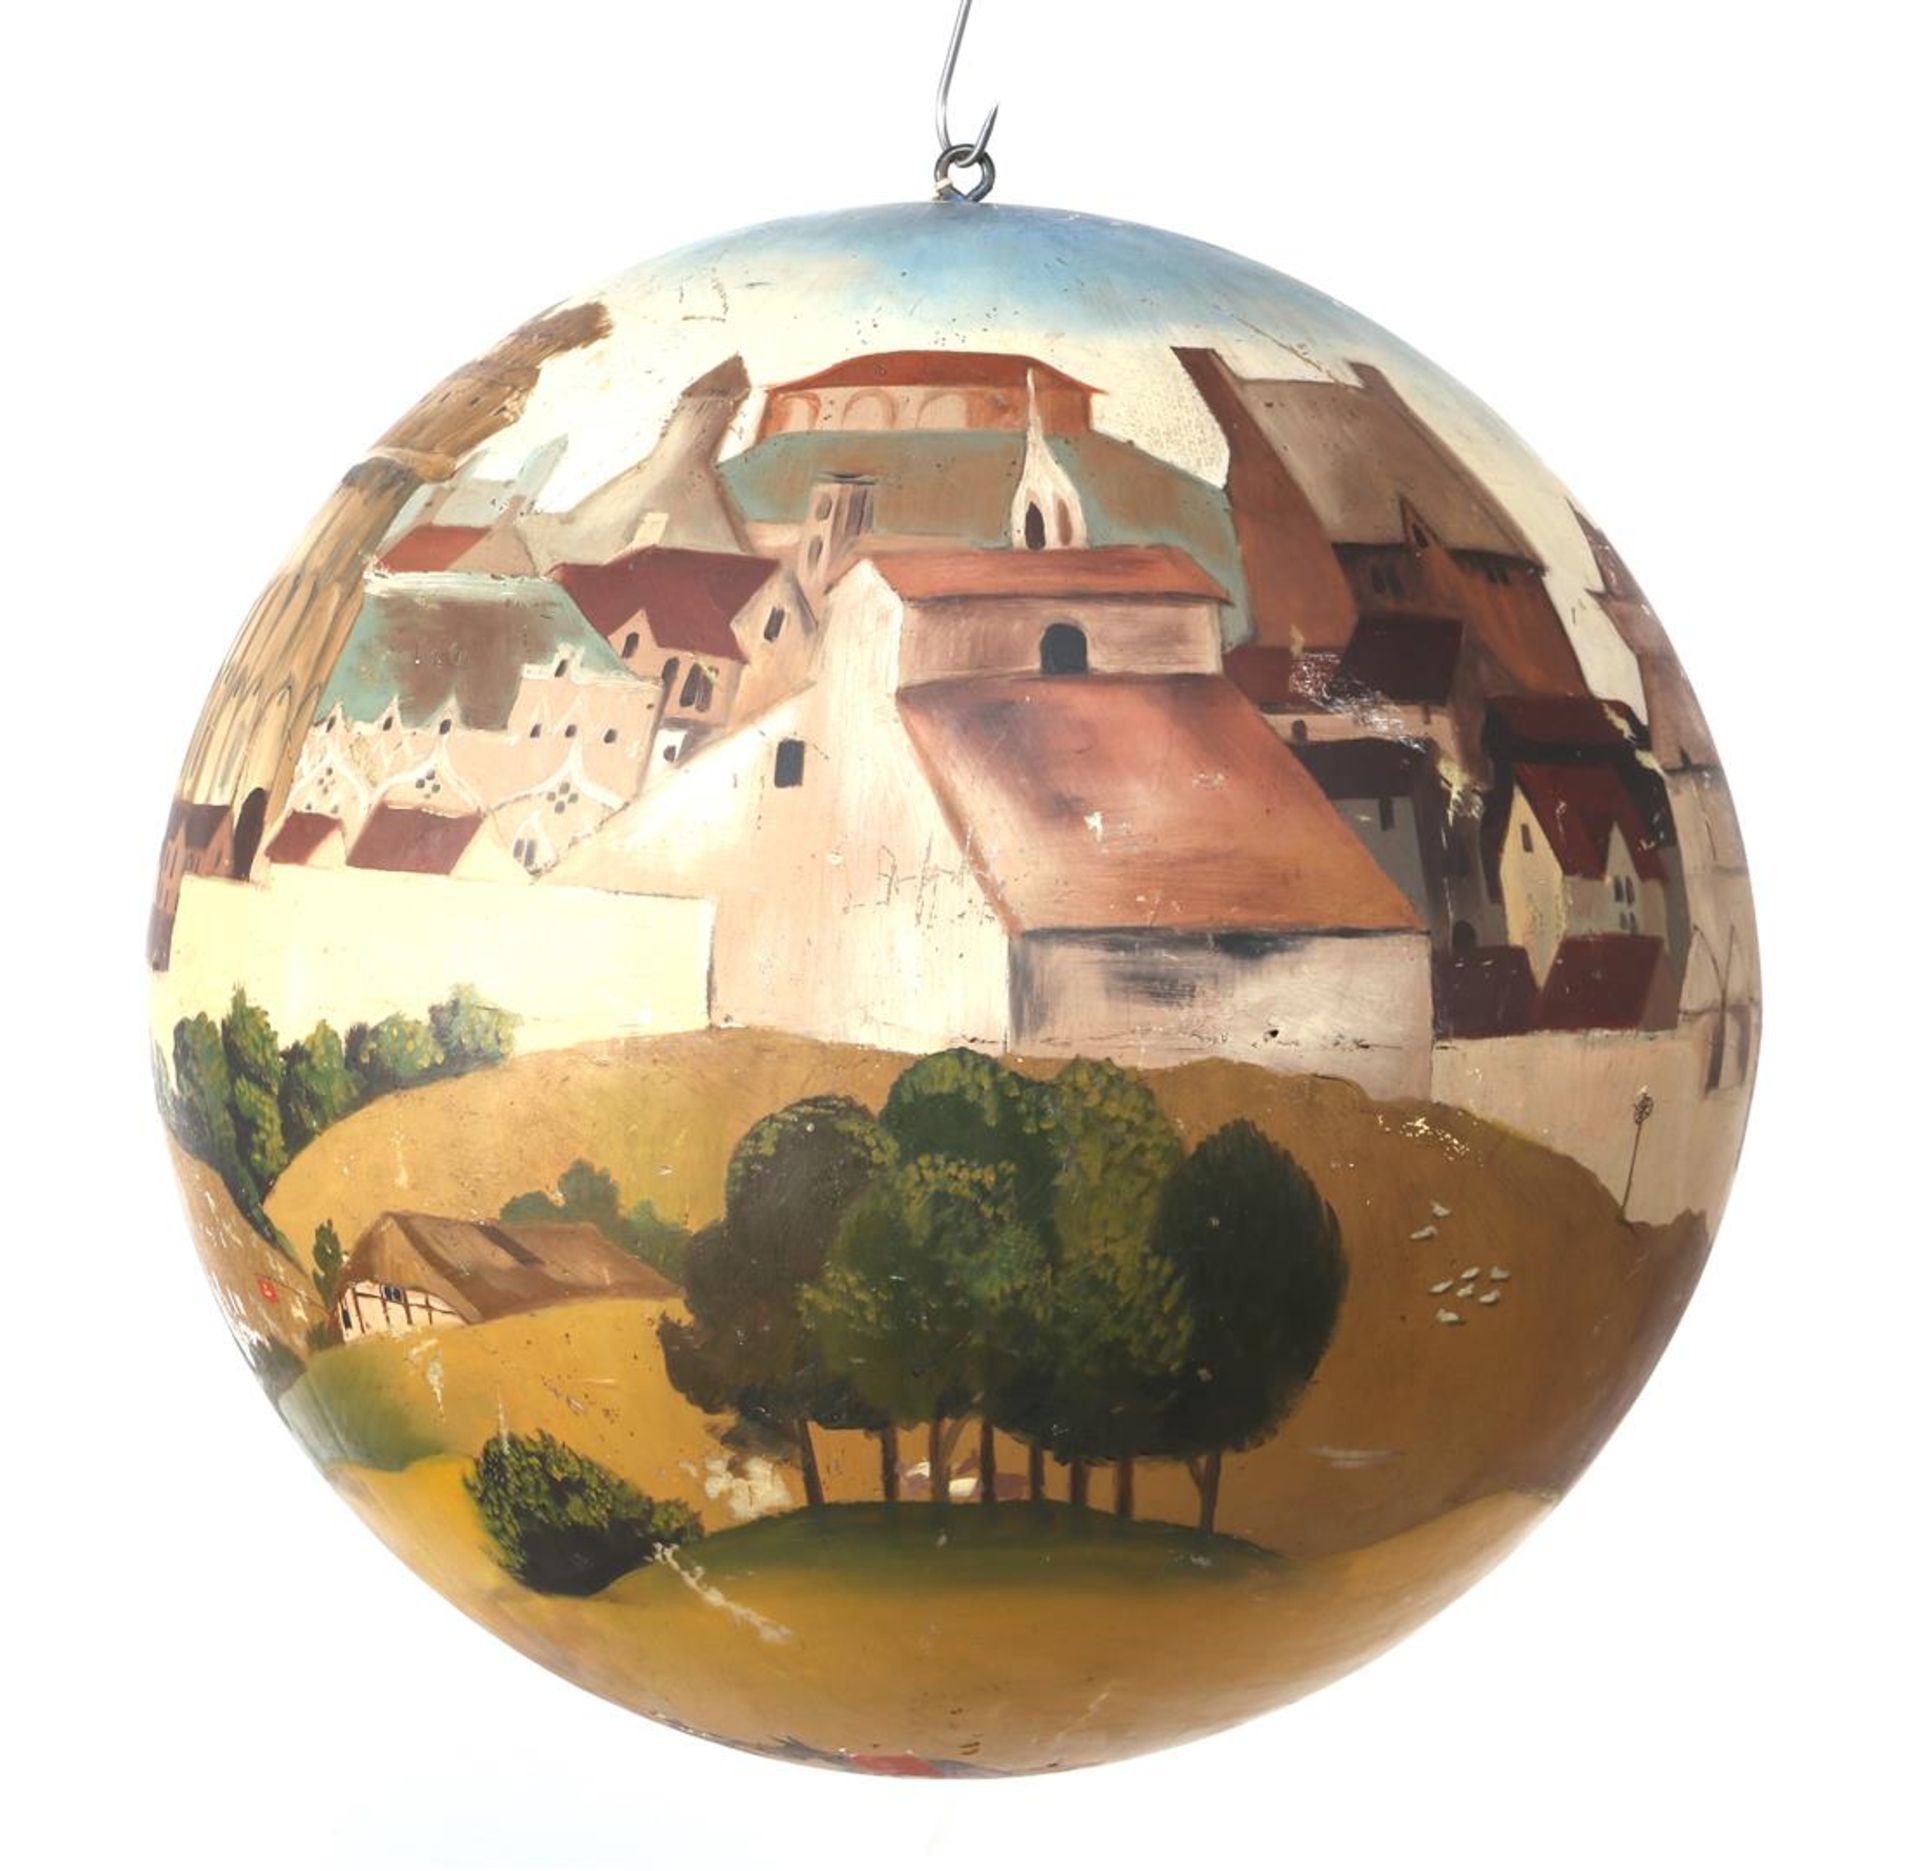 Hand-painted sphere - Image 2 of 3